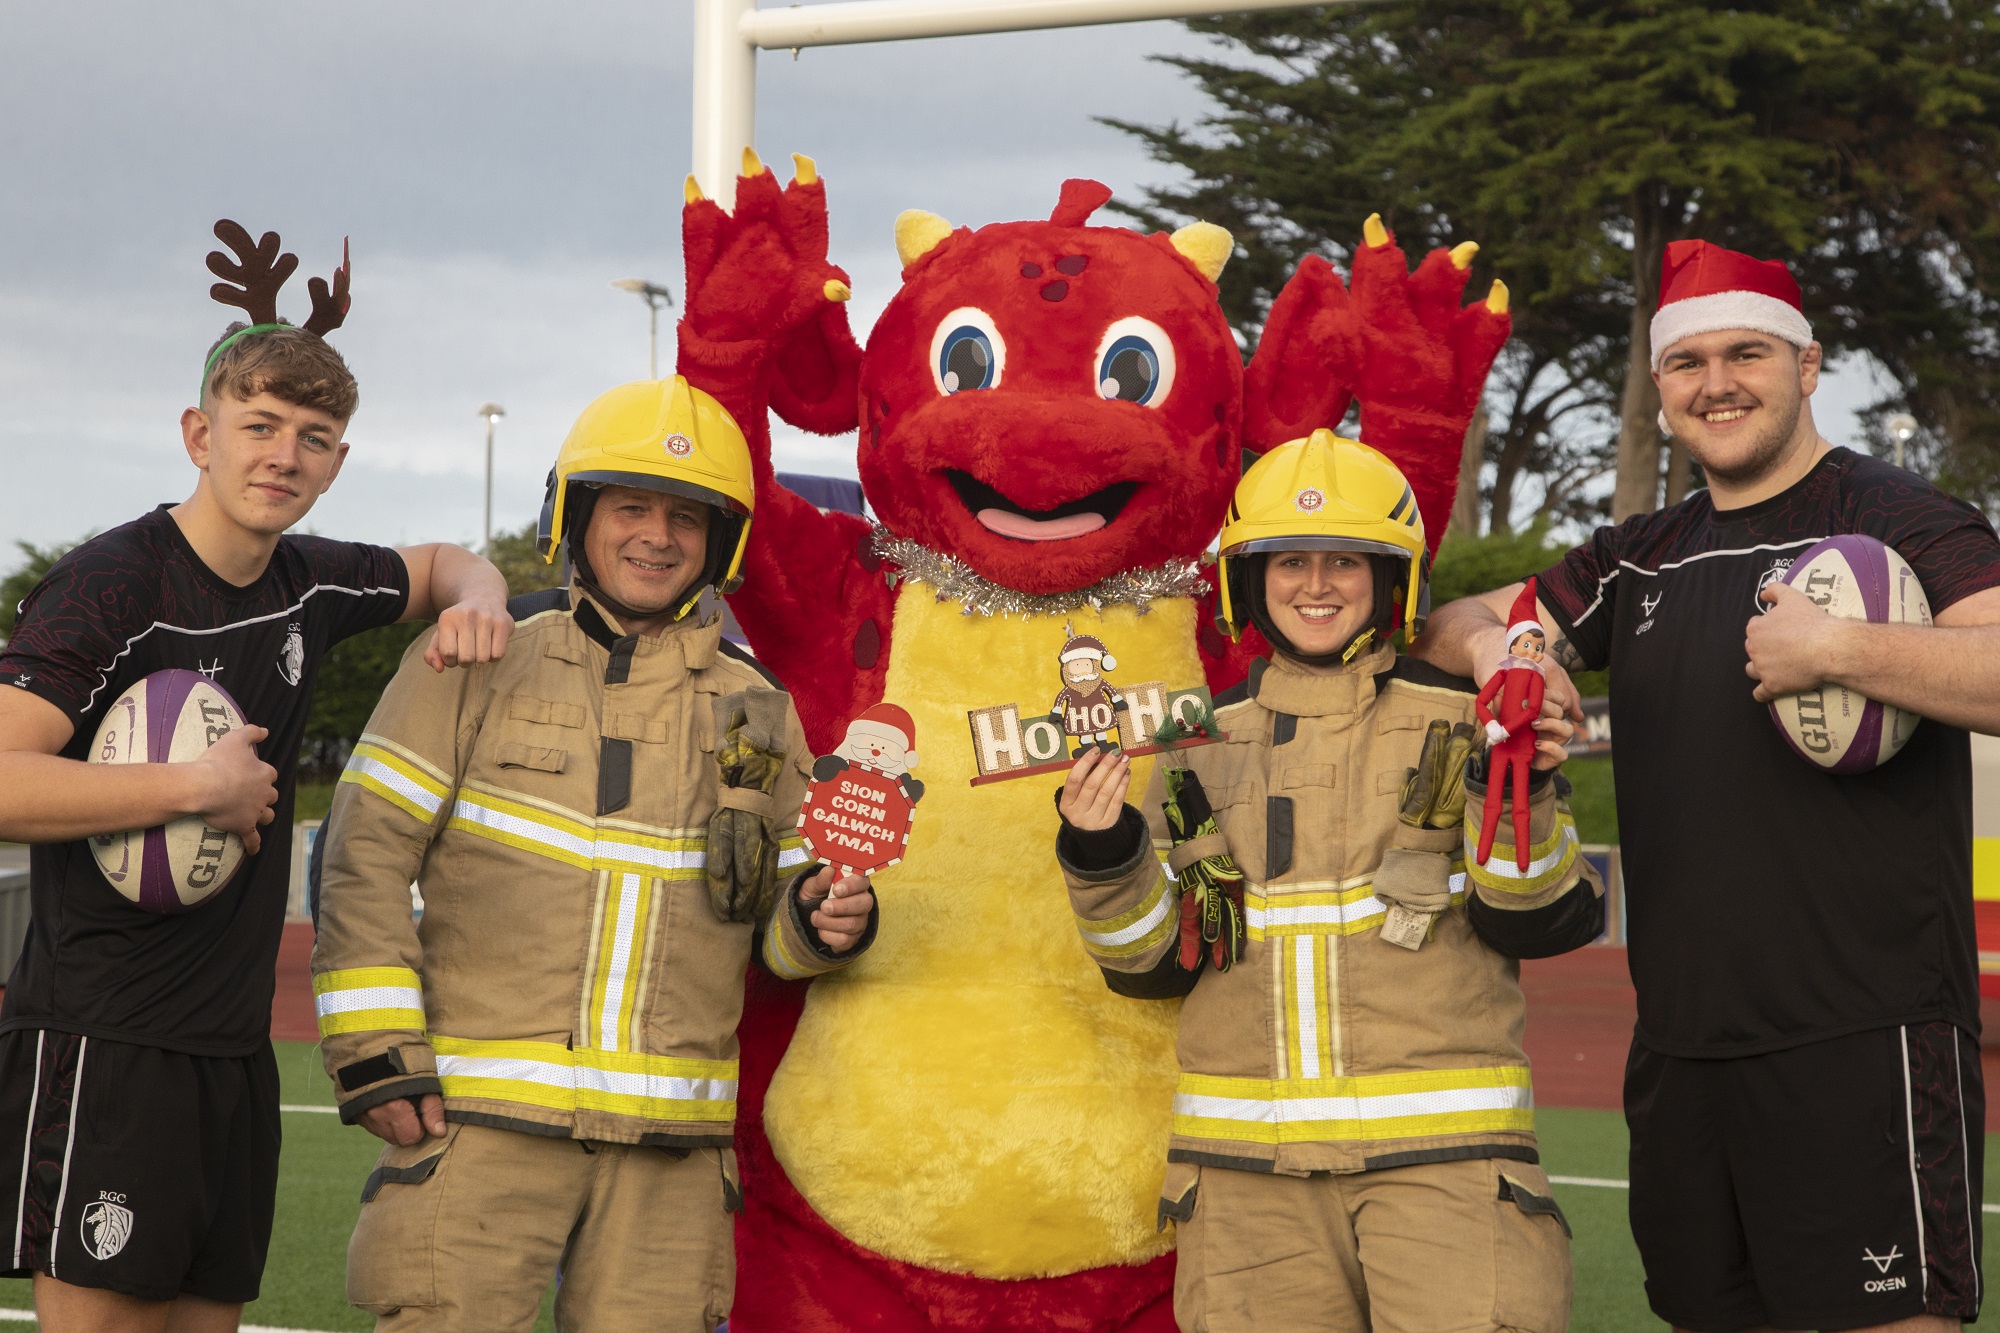 Looking after each other this Christmas - Launch of campaign at RGC match next Saturday